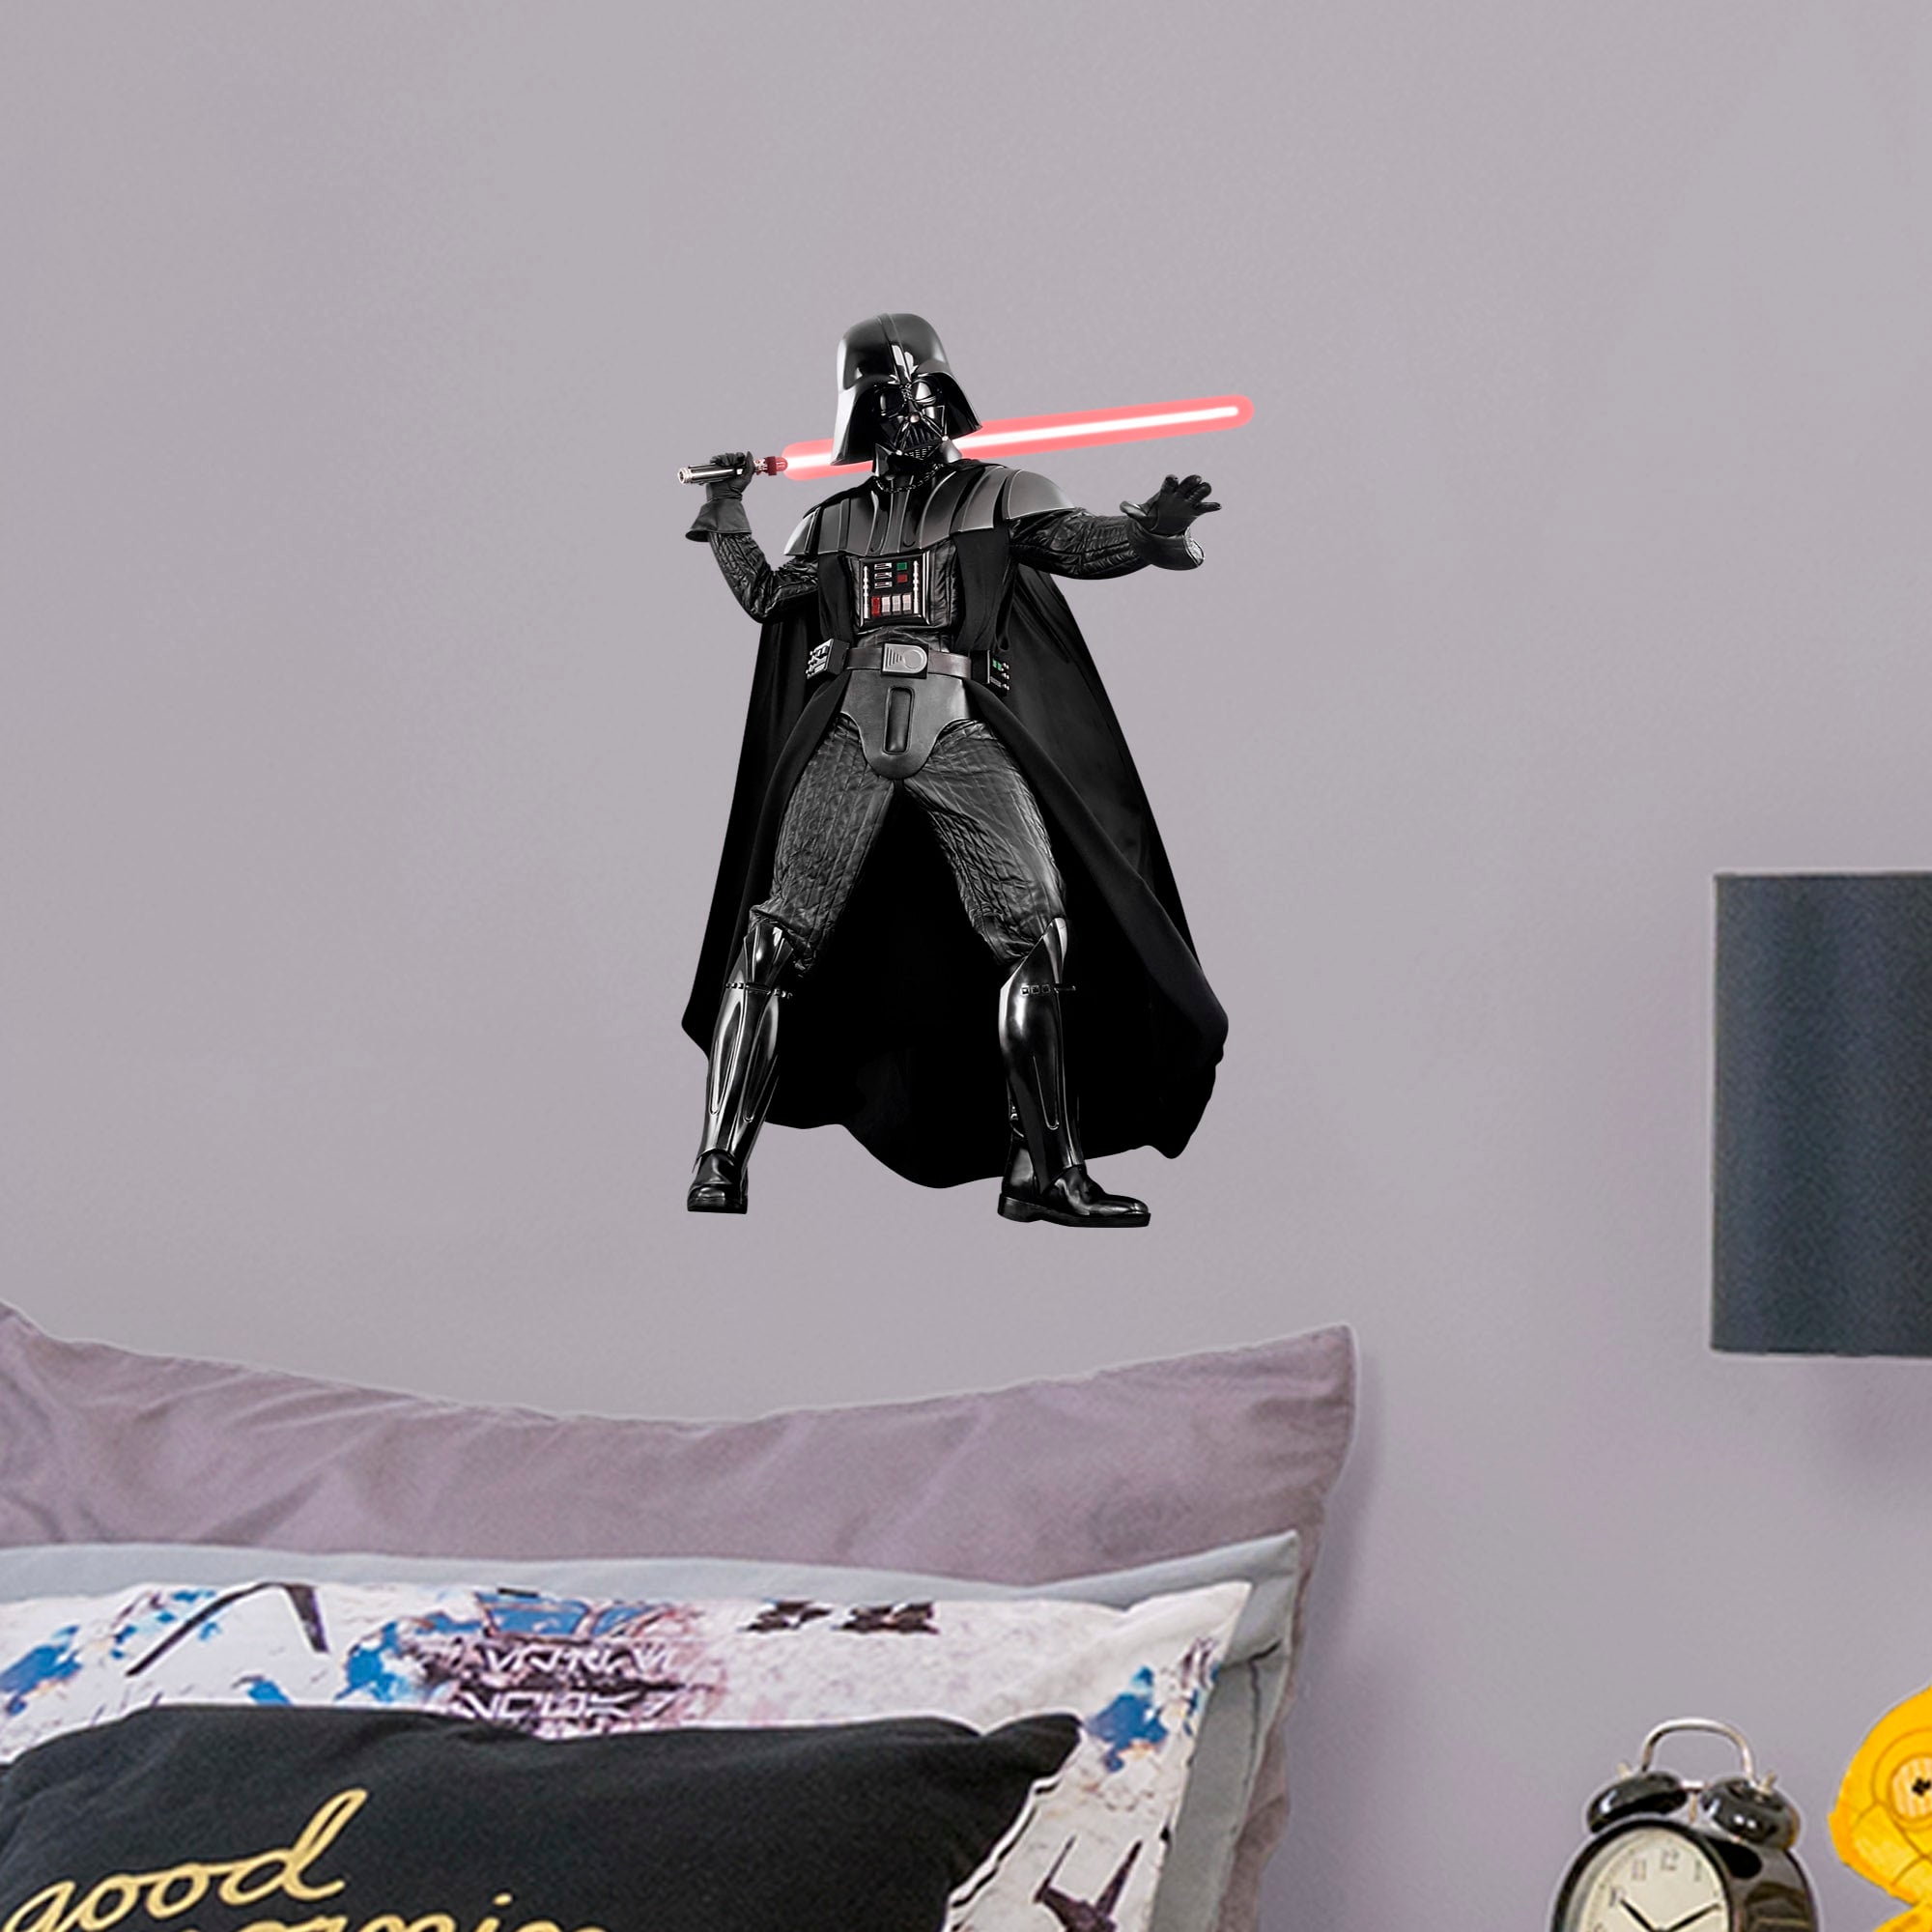 Darth Vader - Officially Licensed Removable Wall Decal Large by Fathead | Vinyl